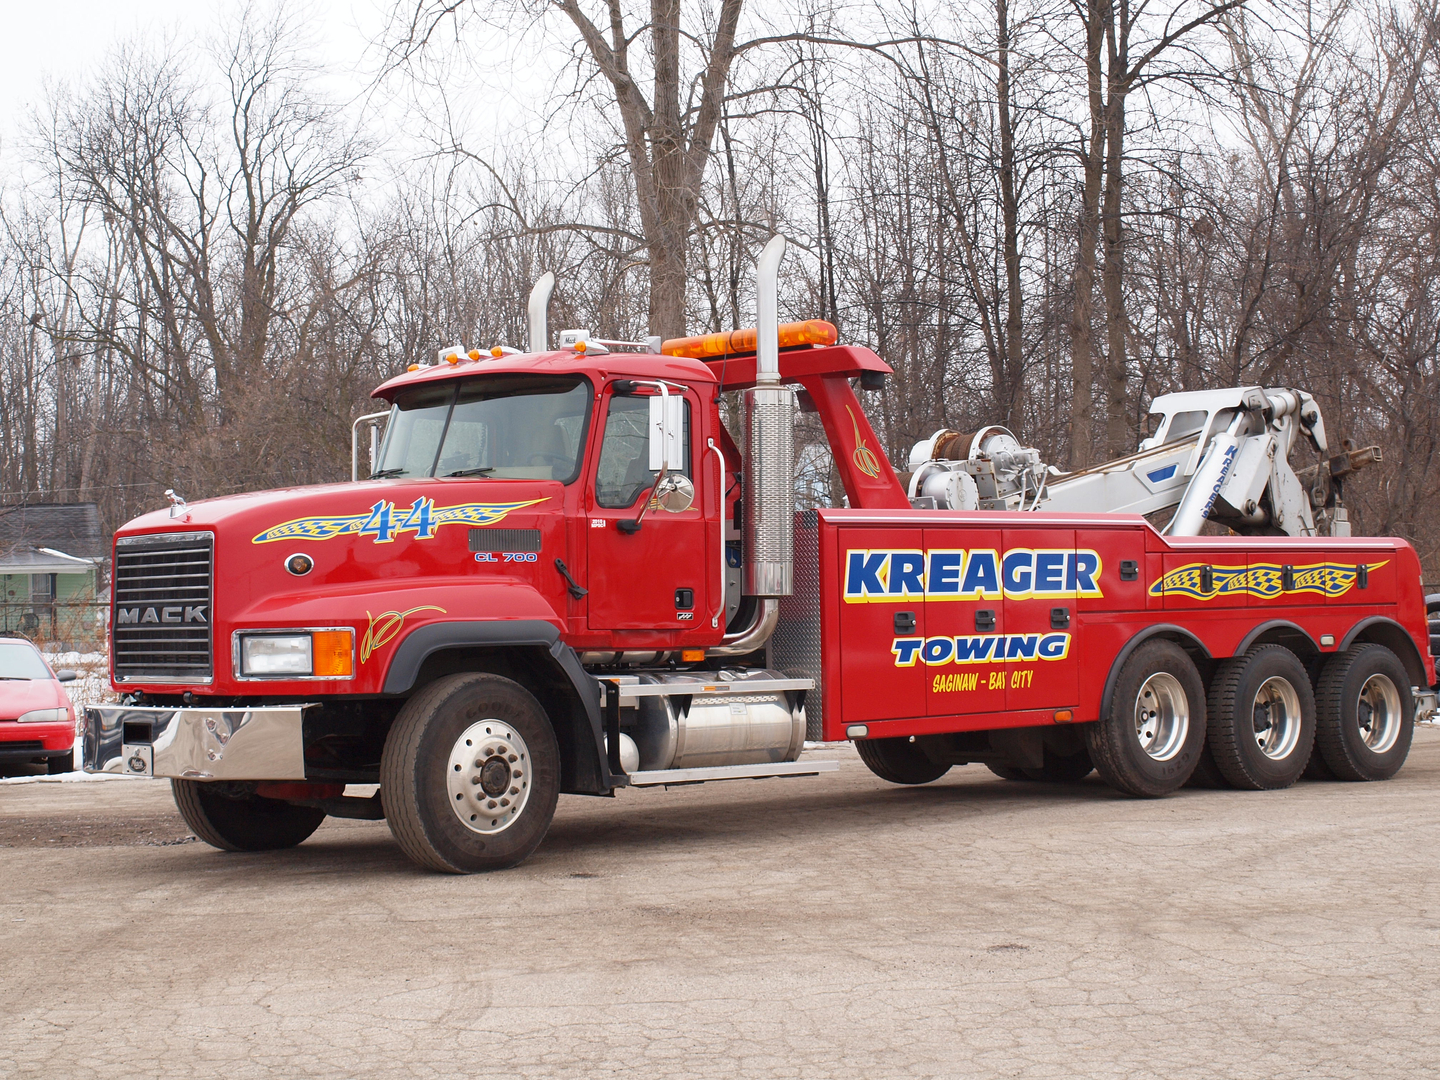 Kreager Towing Photo